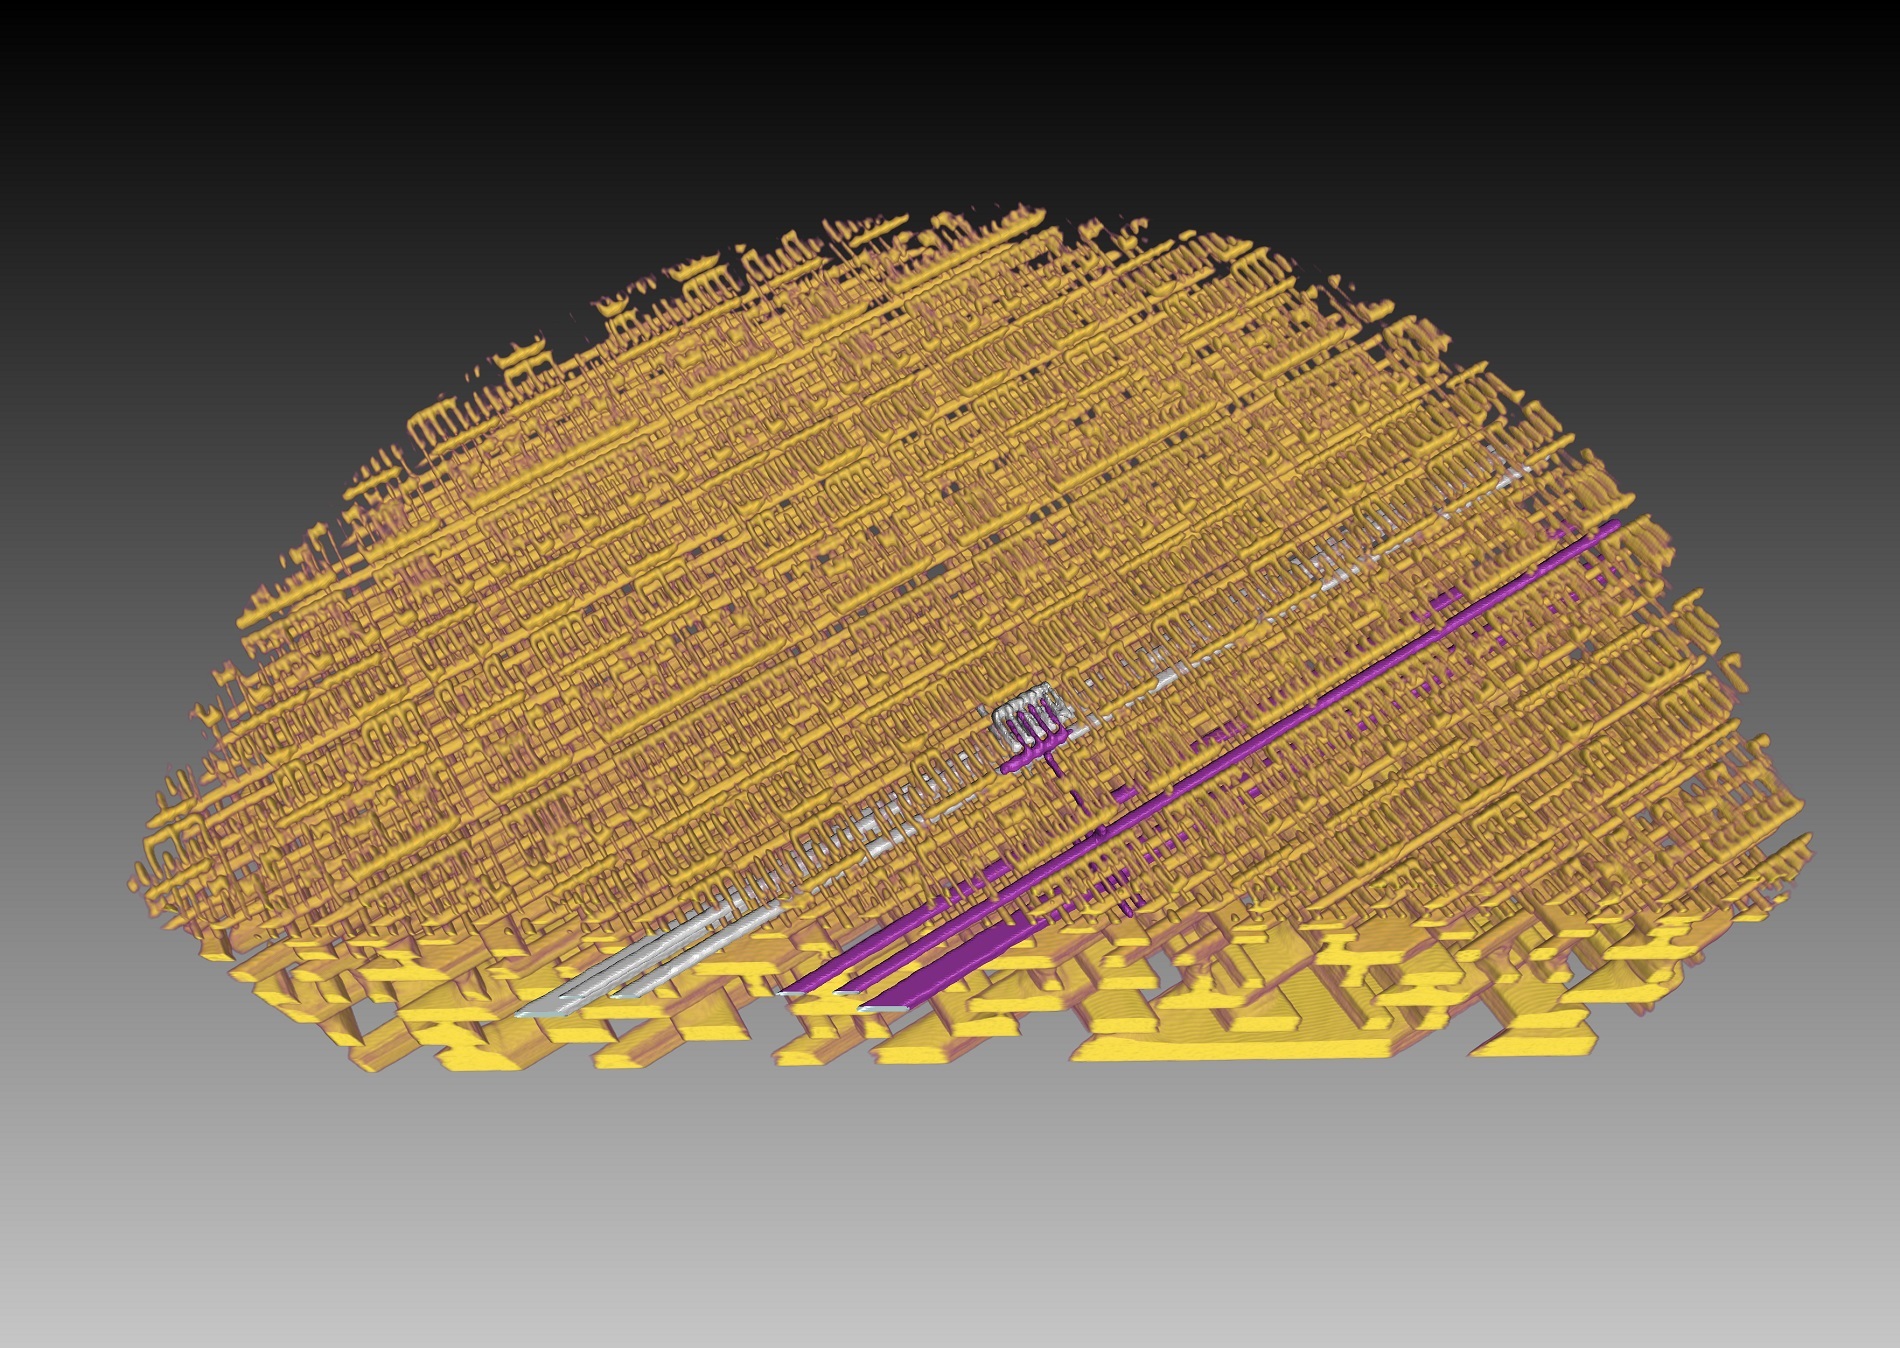 A second 3-D representation of the internal structure of a microchip